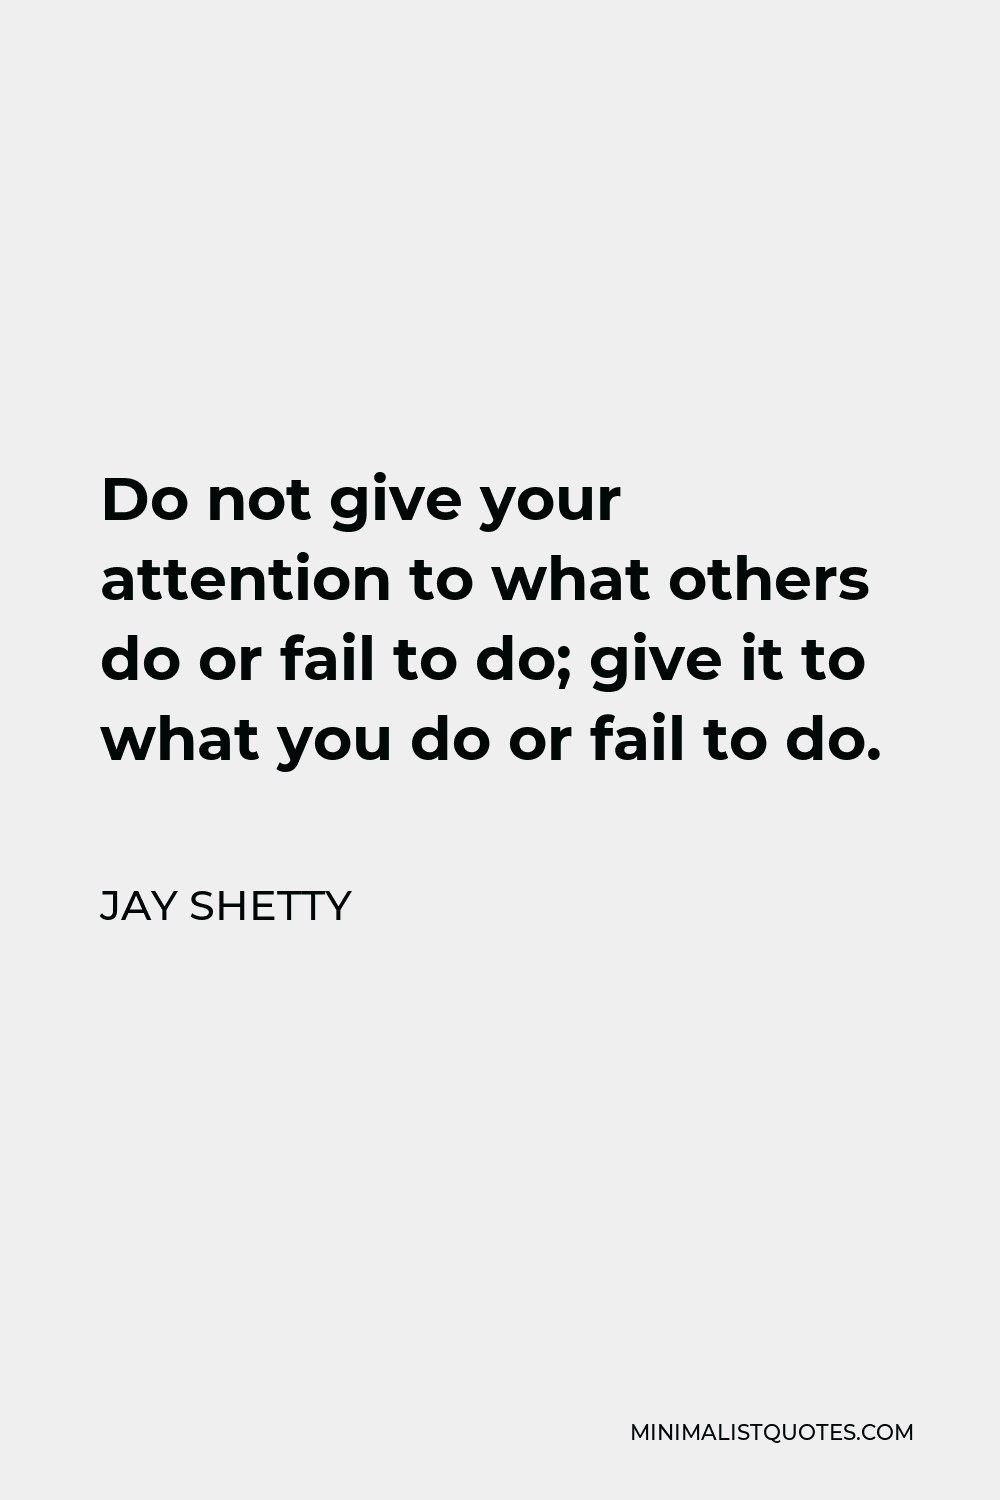 Jay Shetty Quote - Do not give your attention to what others do or fail to do; give it to what you do or fail to do.